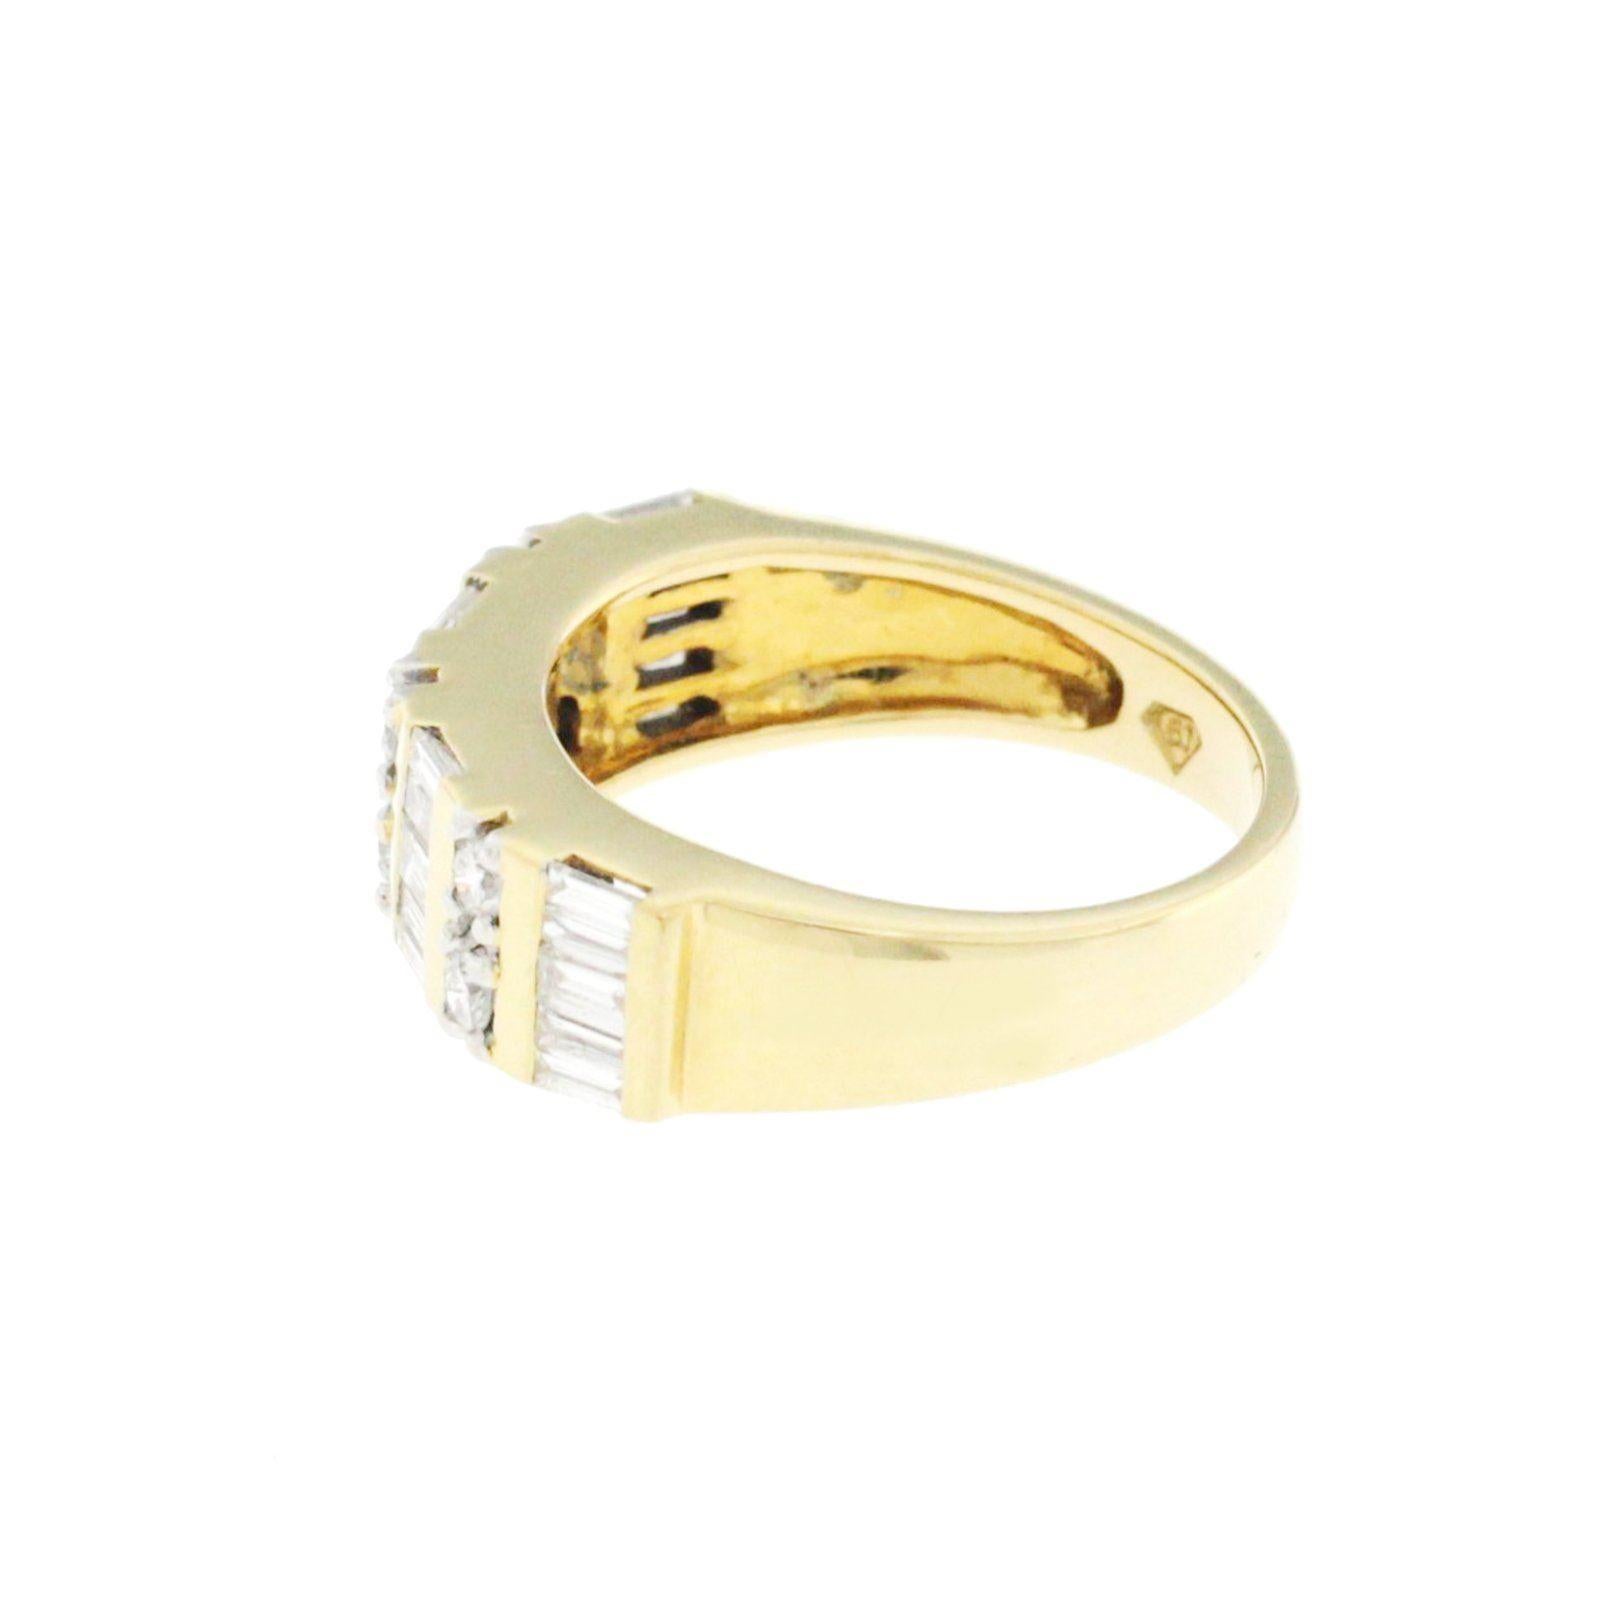 0.49 Carat Diamonds in 18 Karat Yellow Gold Wedding Band Ring In New Condition For Sale In Los Angeles, CA